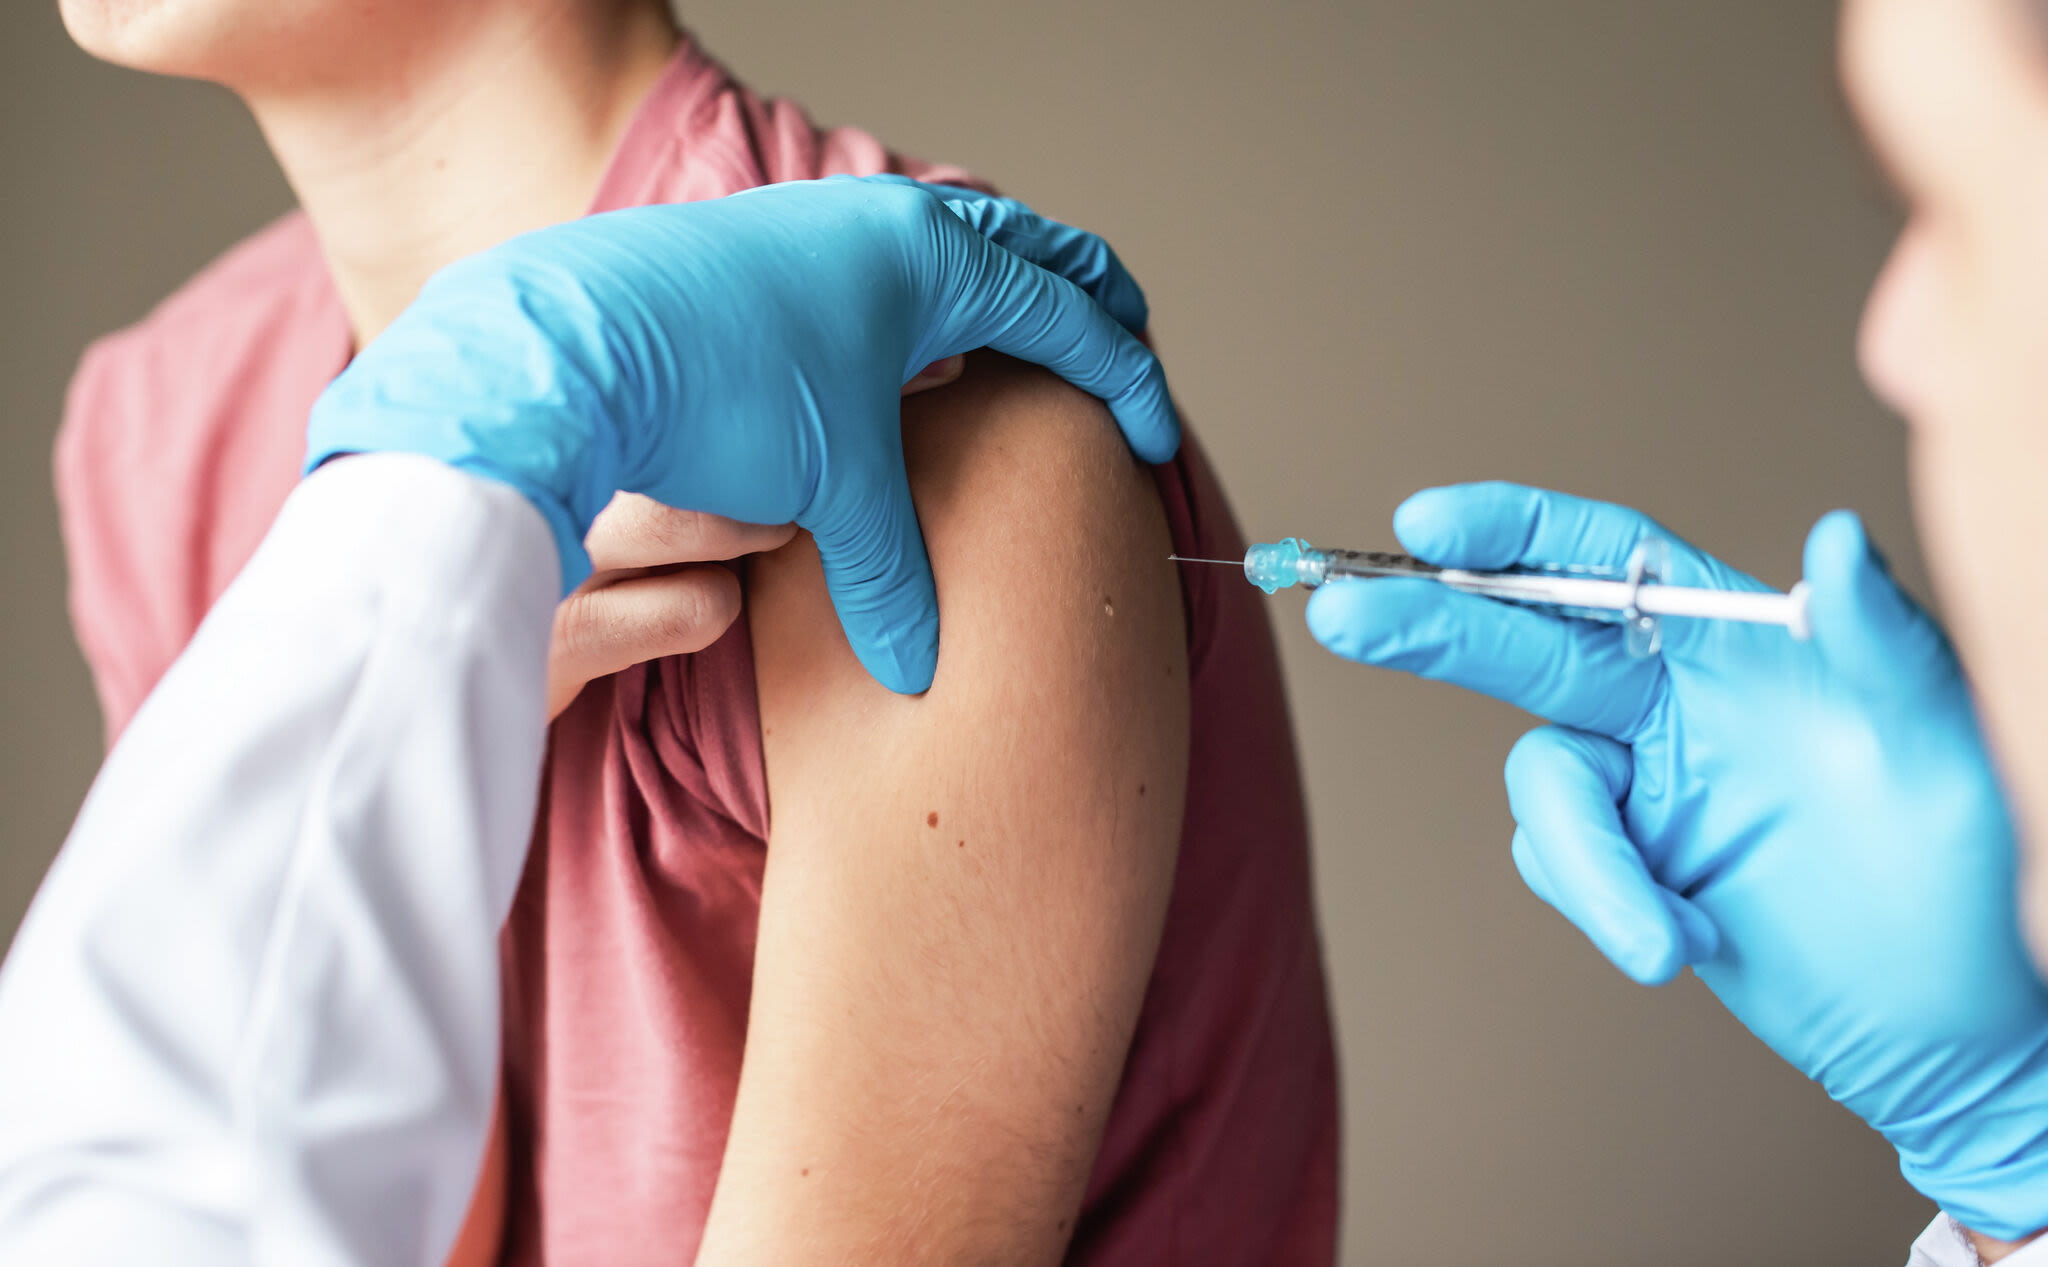 As states loosen vaccine requirements, public health experts' worries grow